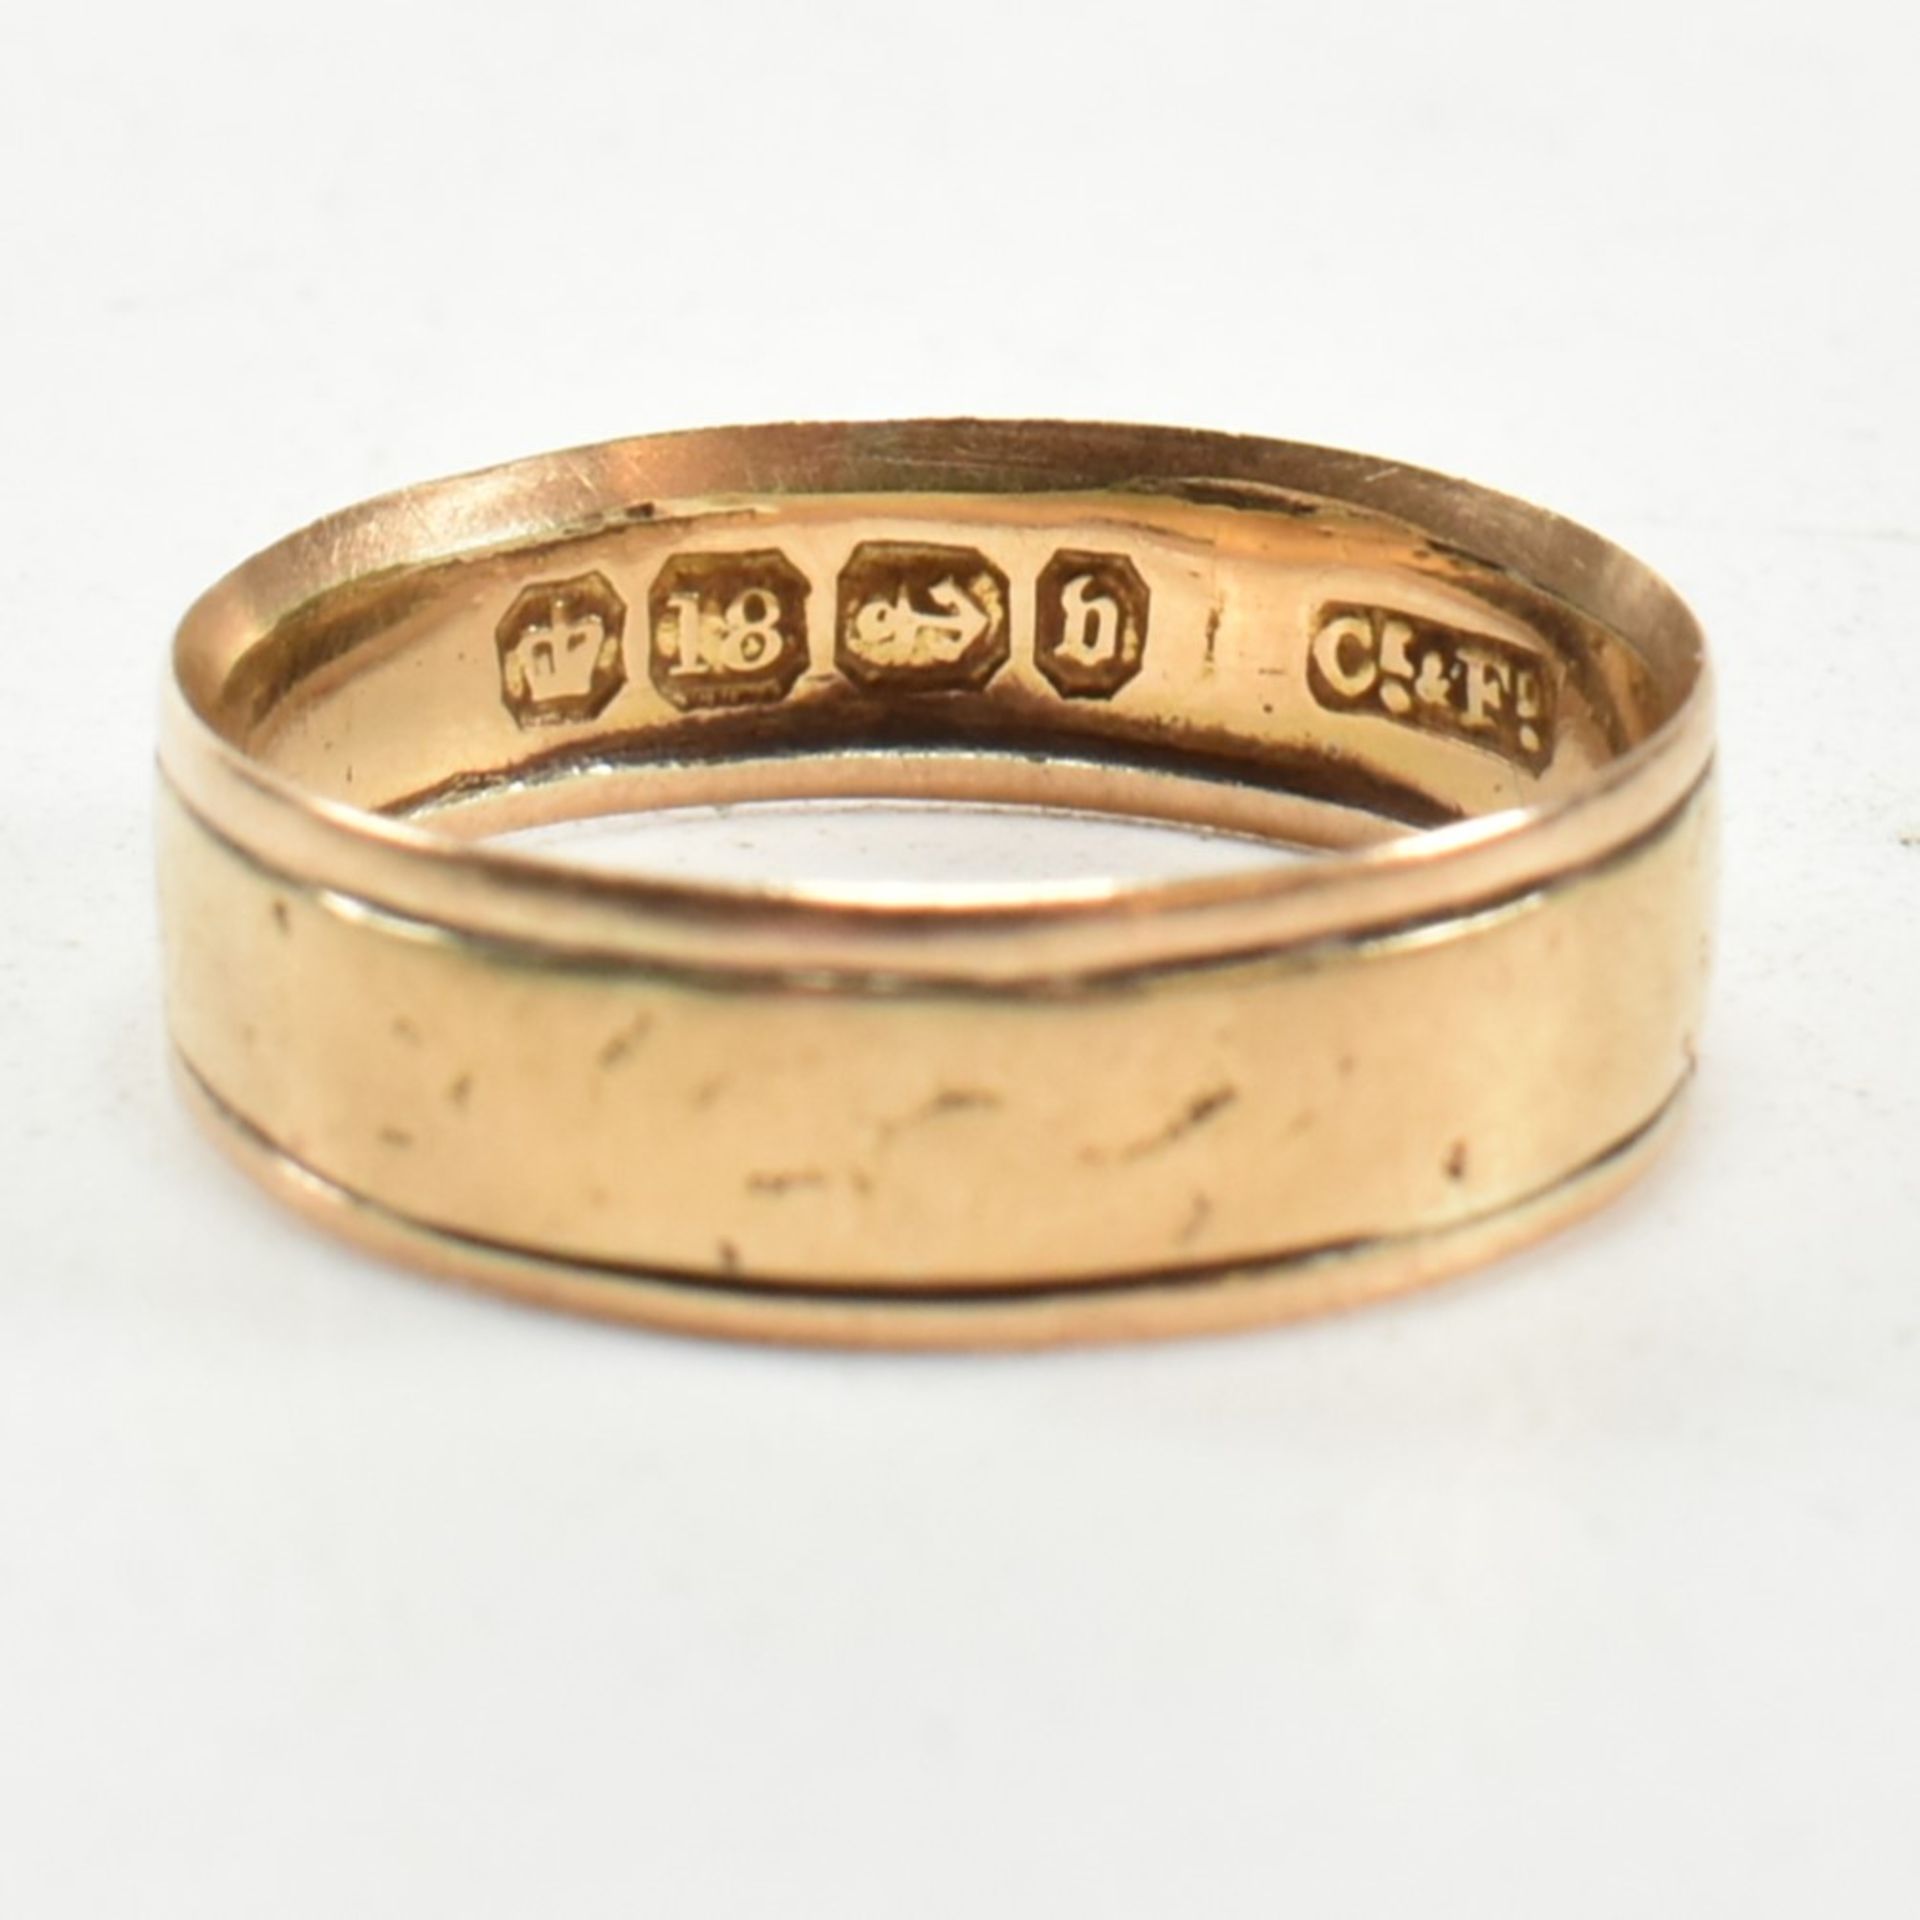 VICTORIAN HALLMARKED 18CT GOLD BAND RING - Image 2 of 4